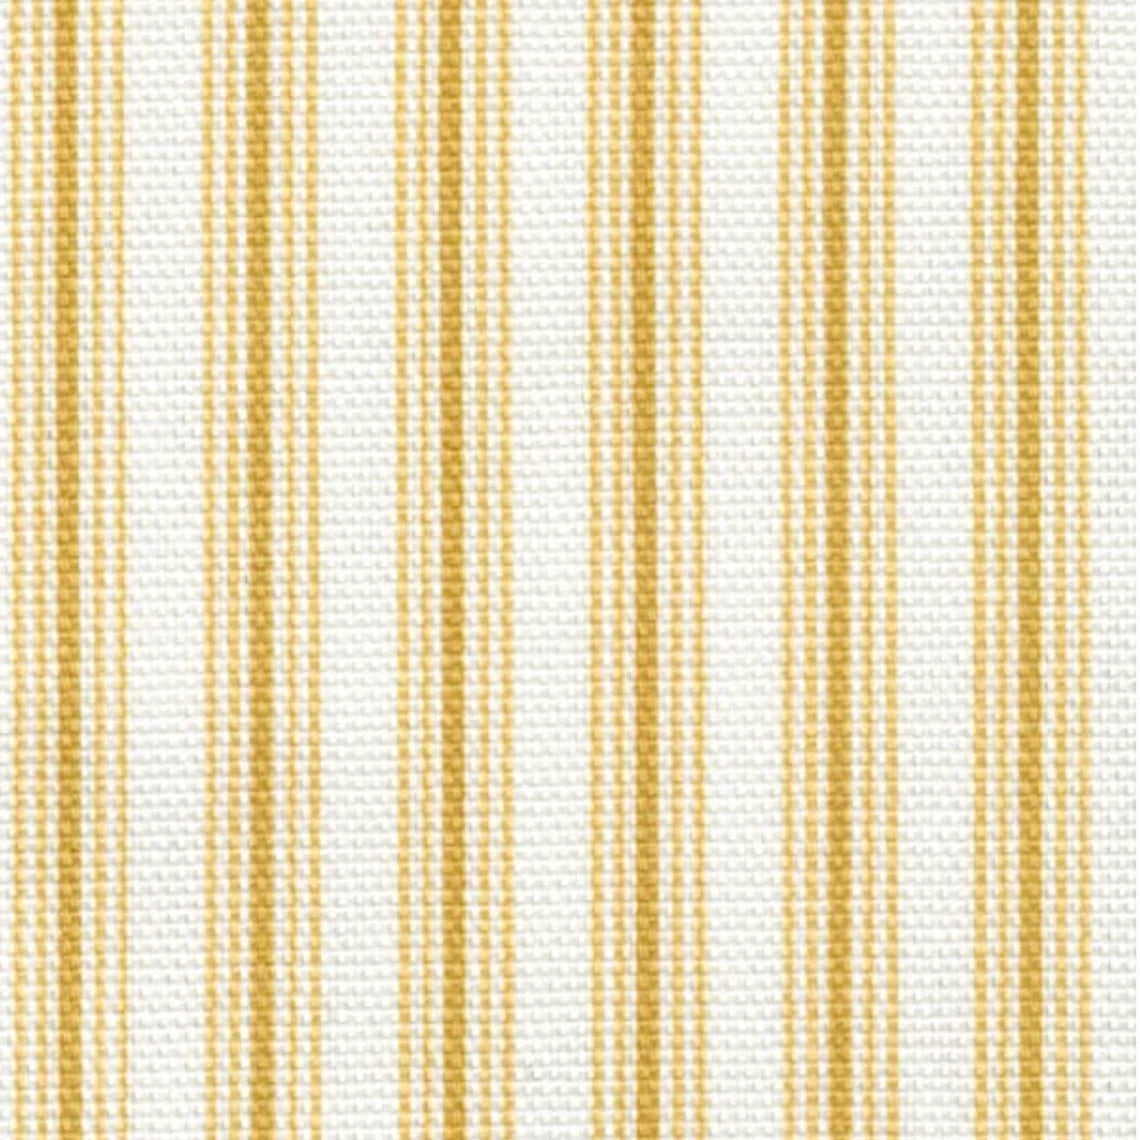 pinch pleated curtain panels pair in cottage barley yellow gold stripe